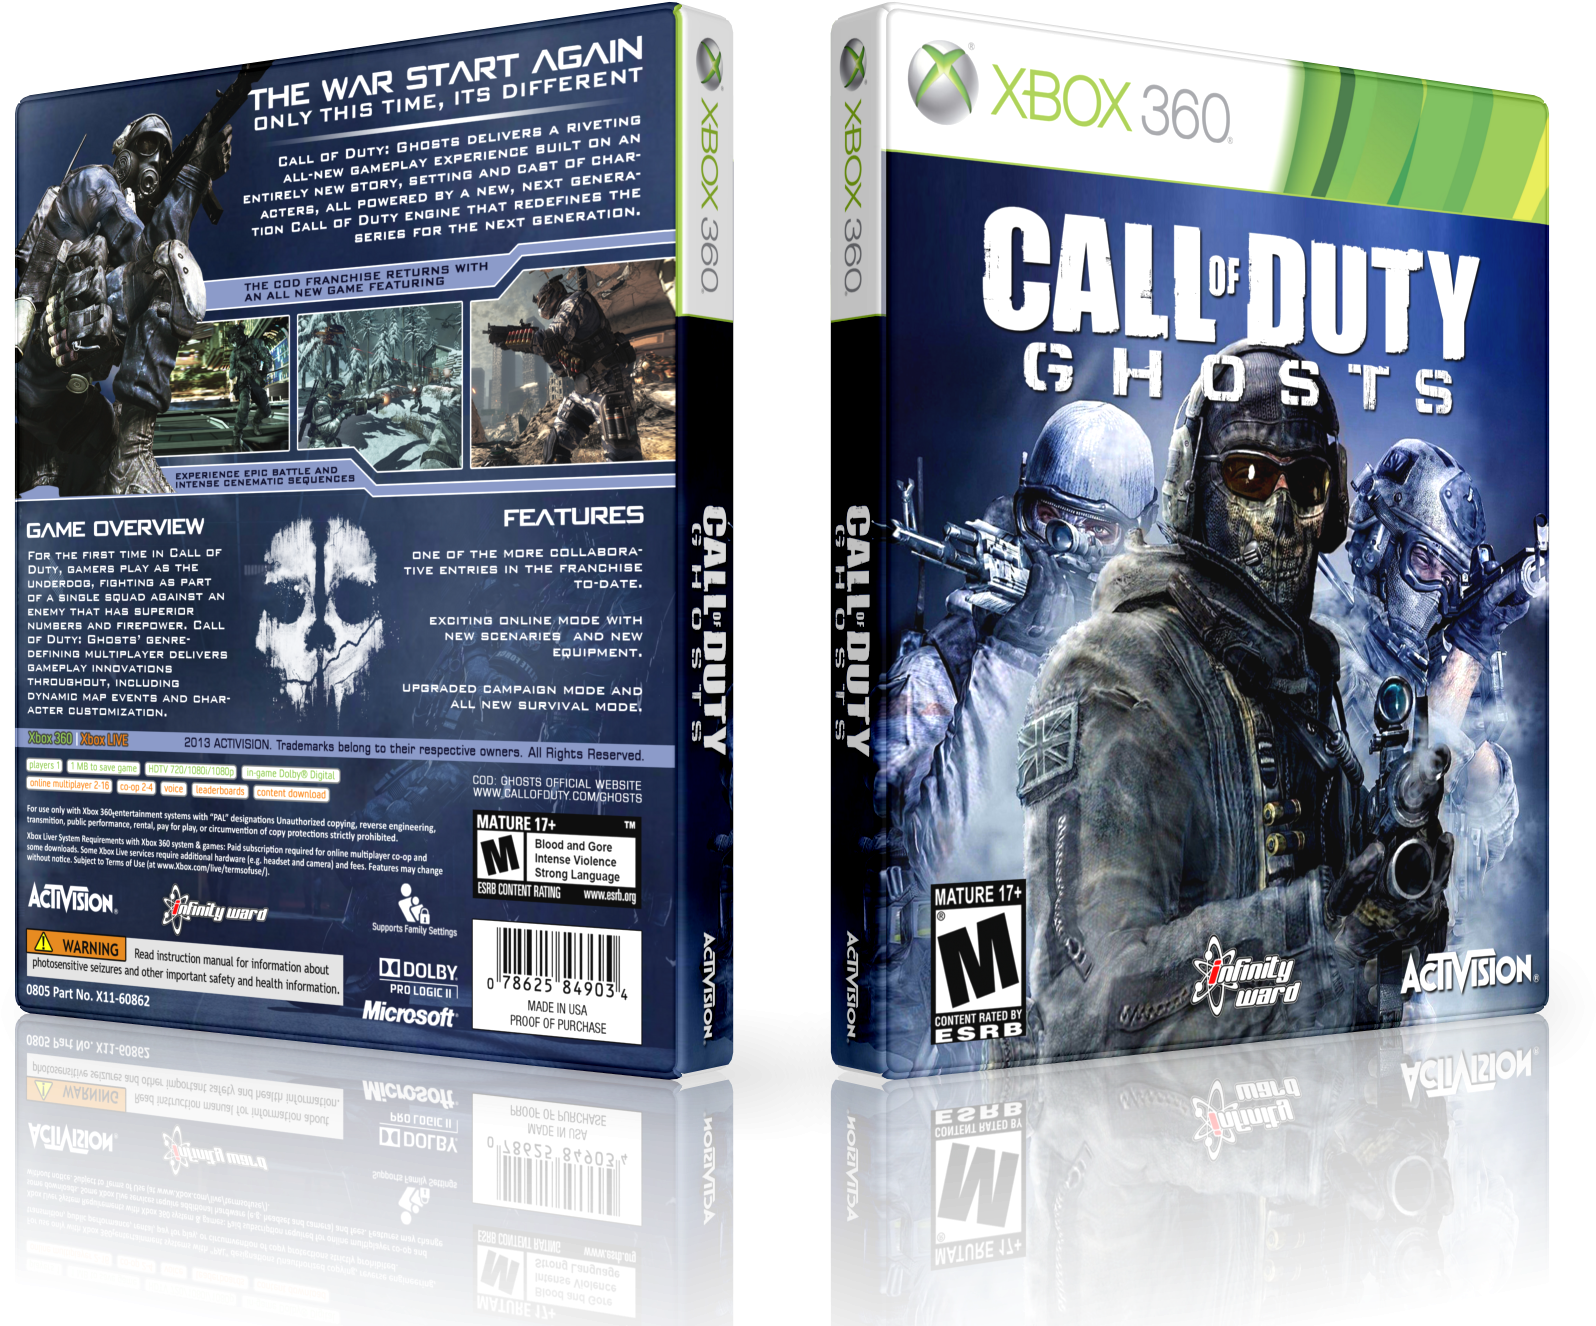 A Video Game Case With A Picture Of Soldiers And A Soldier